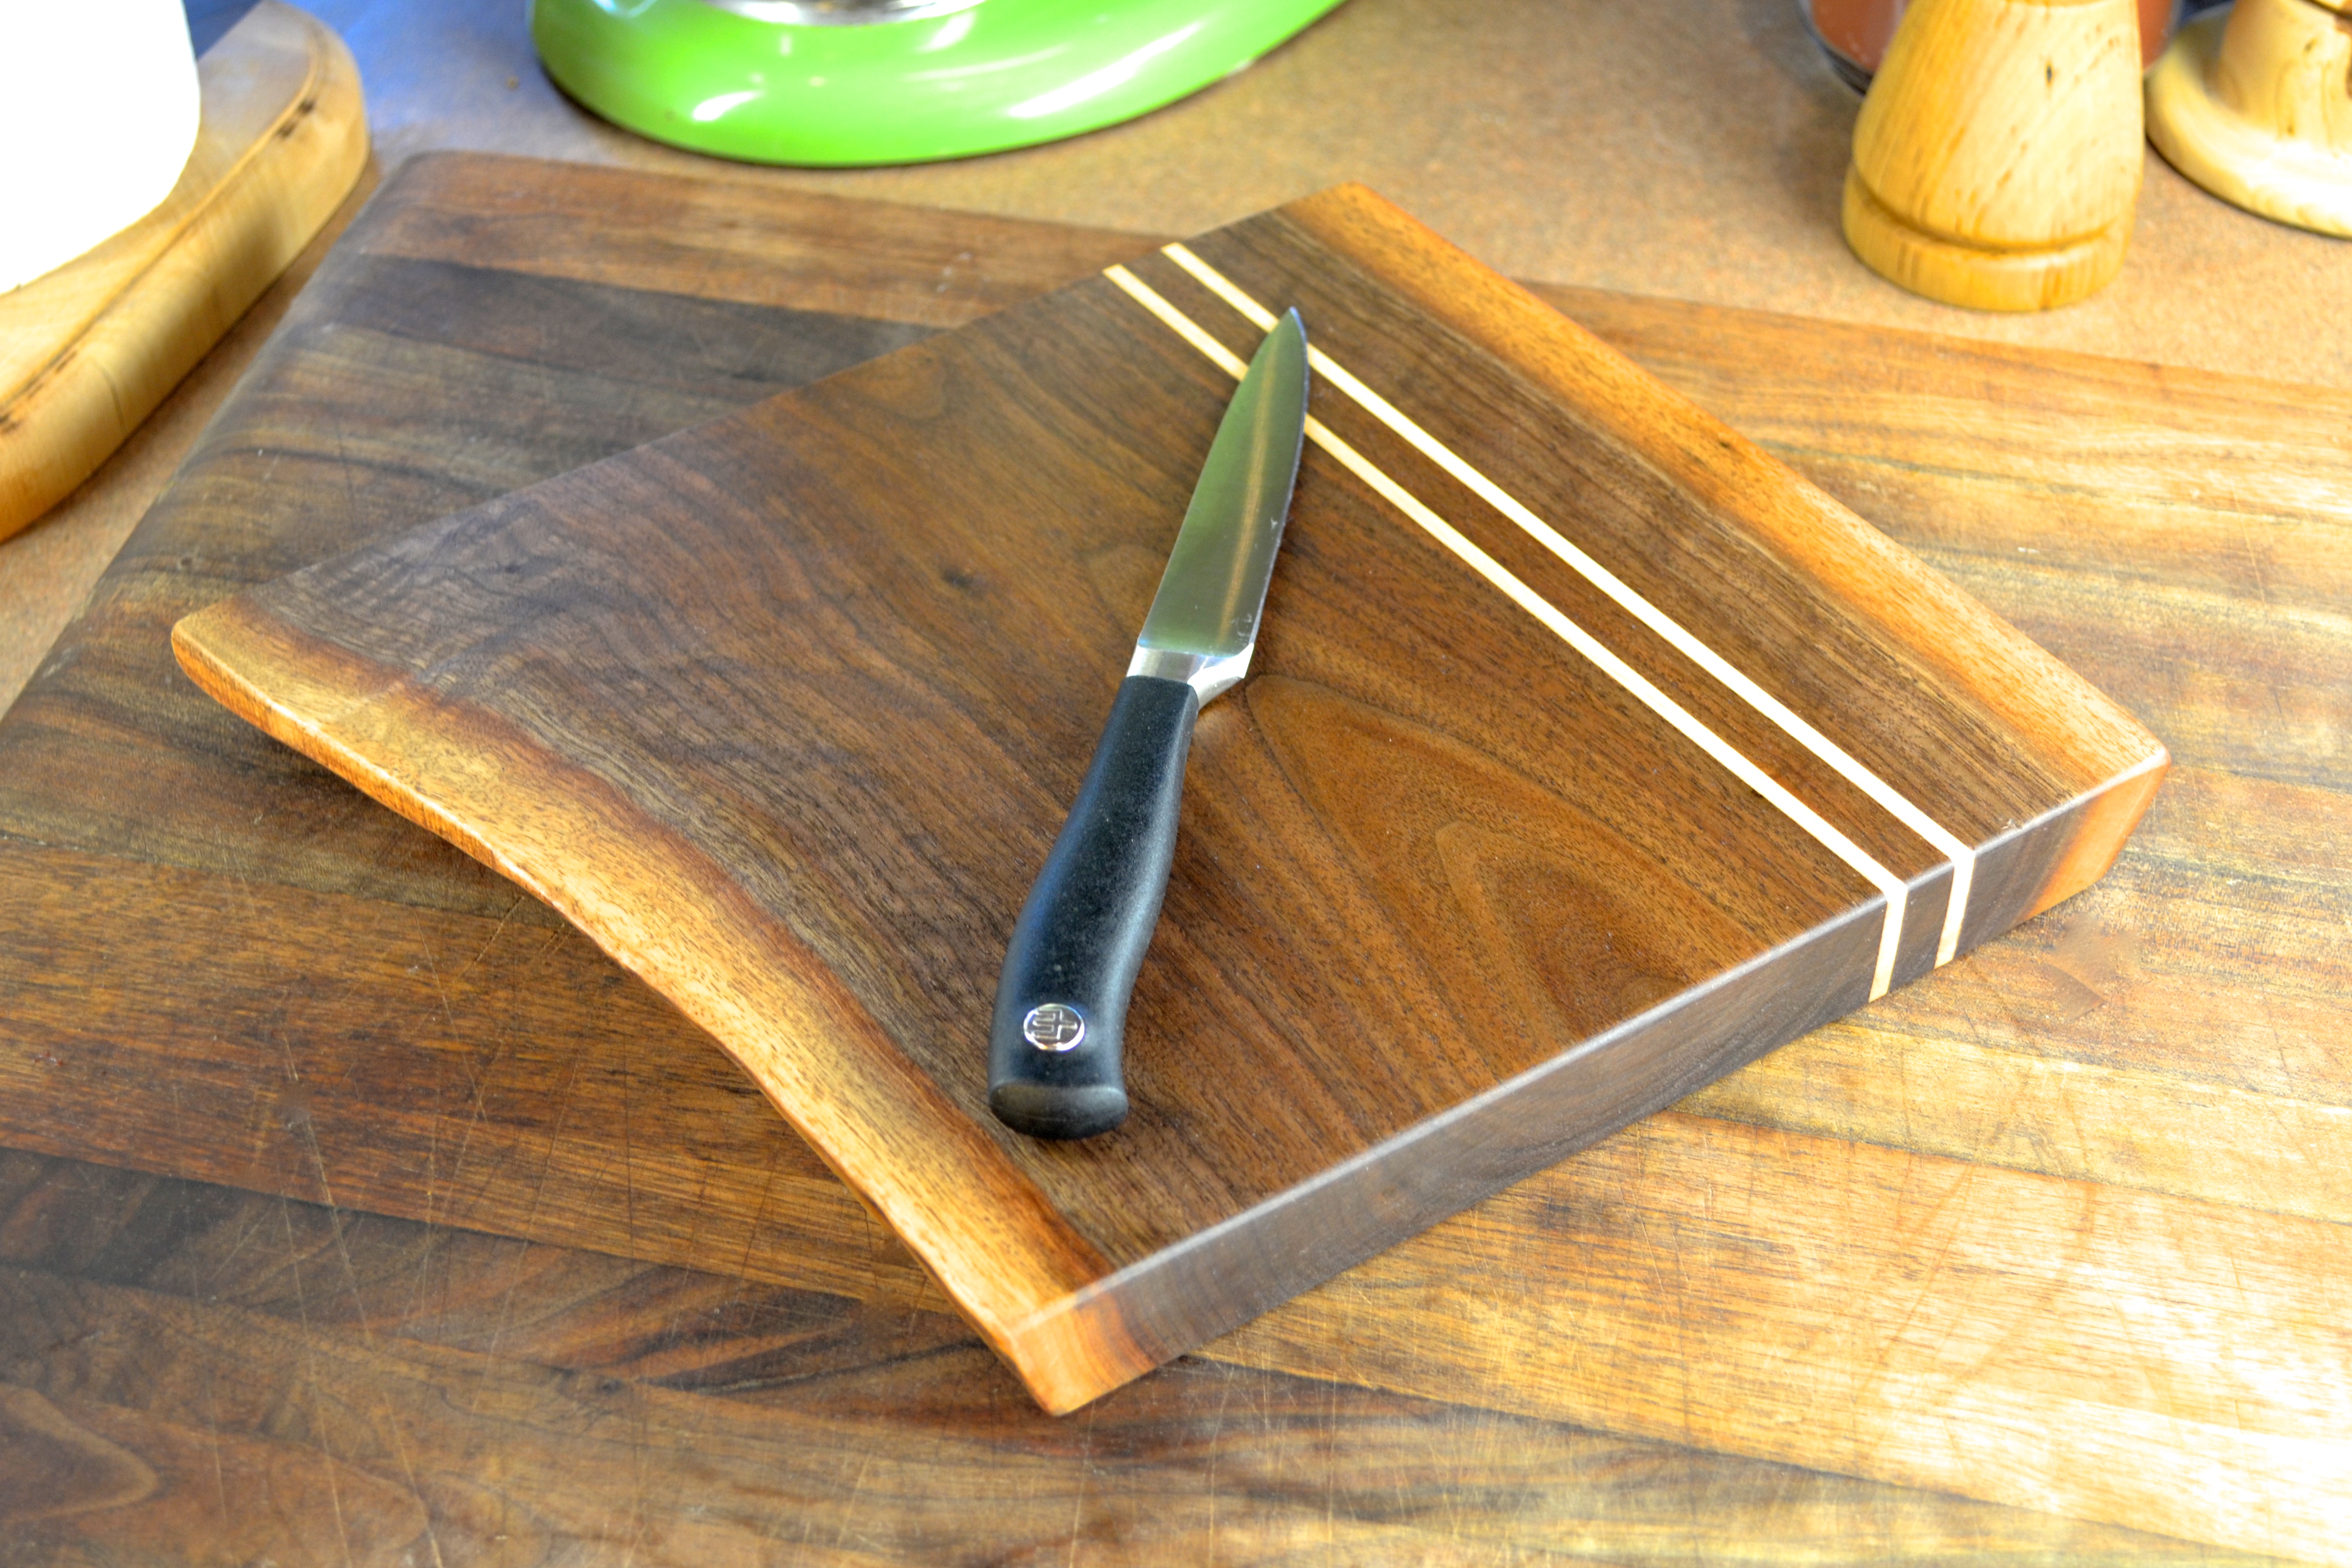 New Cutting Boards!